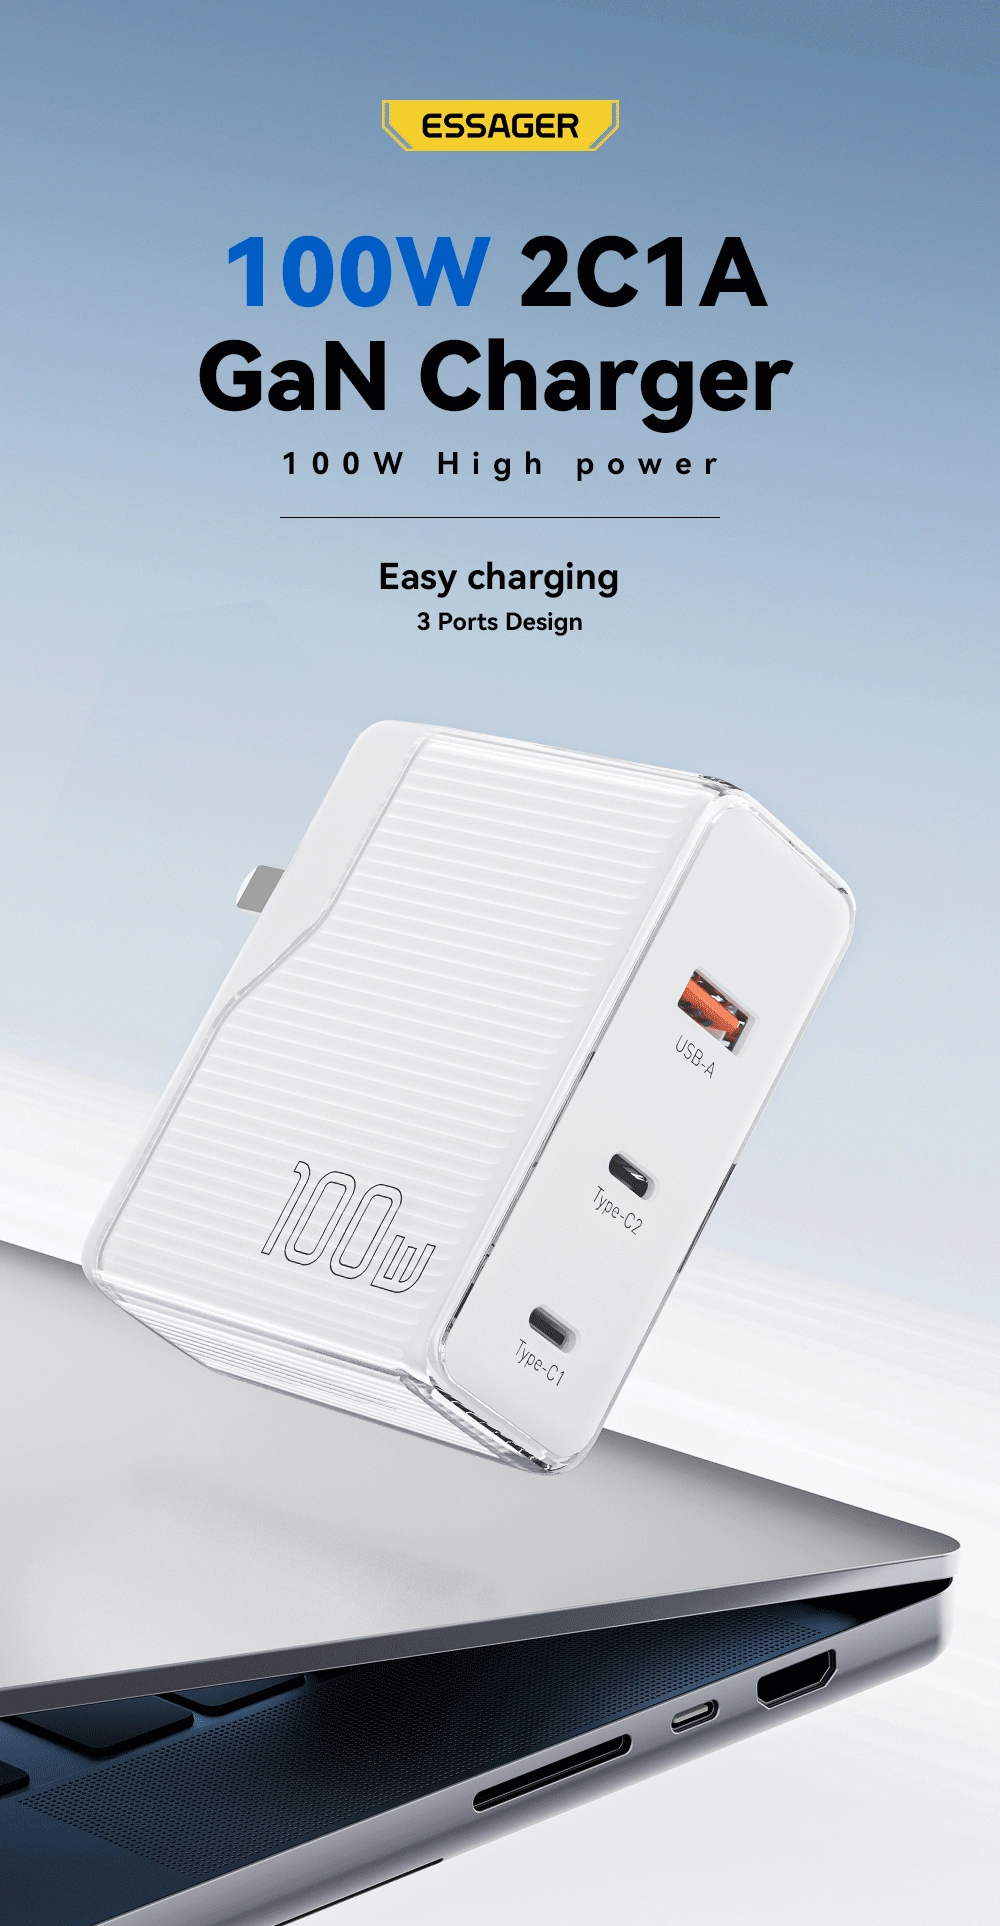 ESSAGER ES-CD32 Series 100W PD3.1 QC4.0 GaN Charger Super Fast Wall Charger